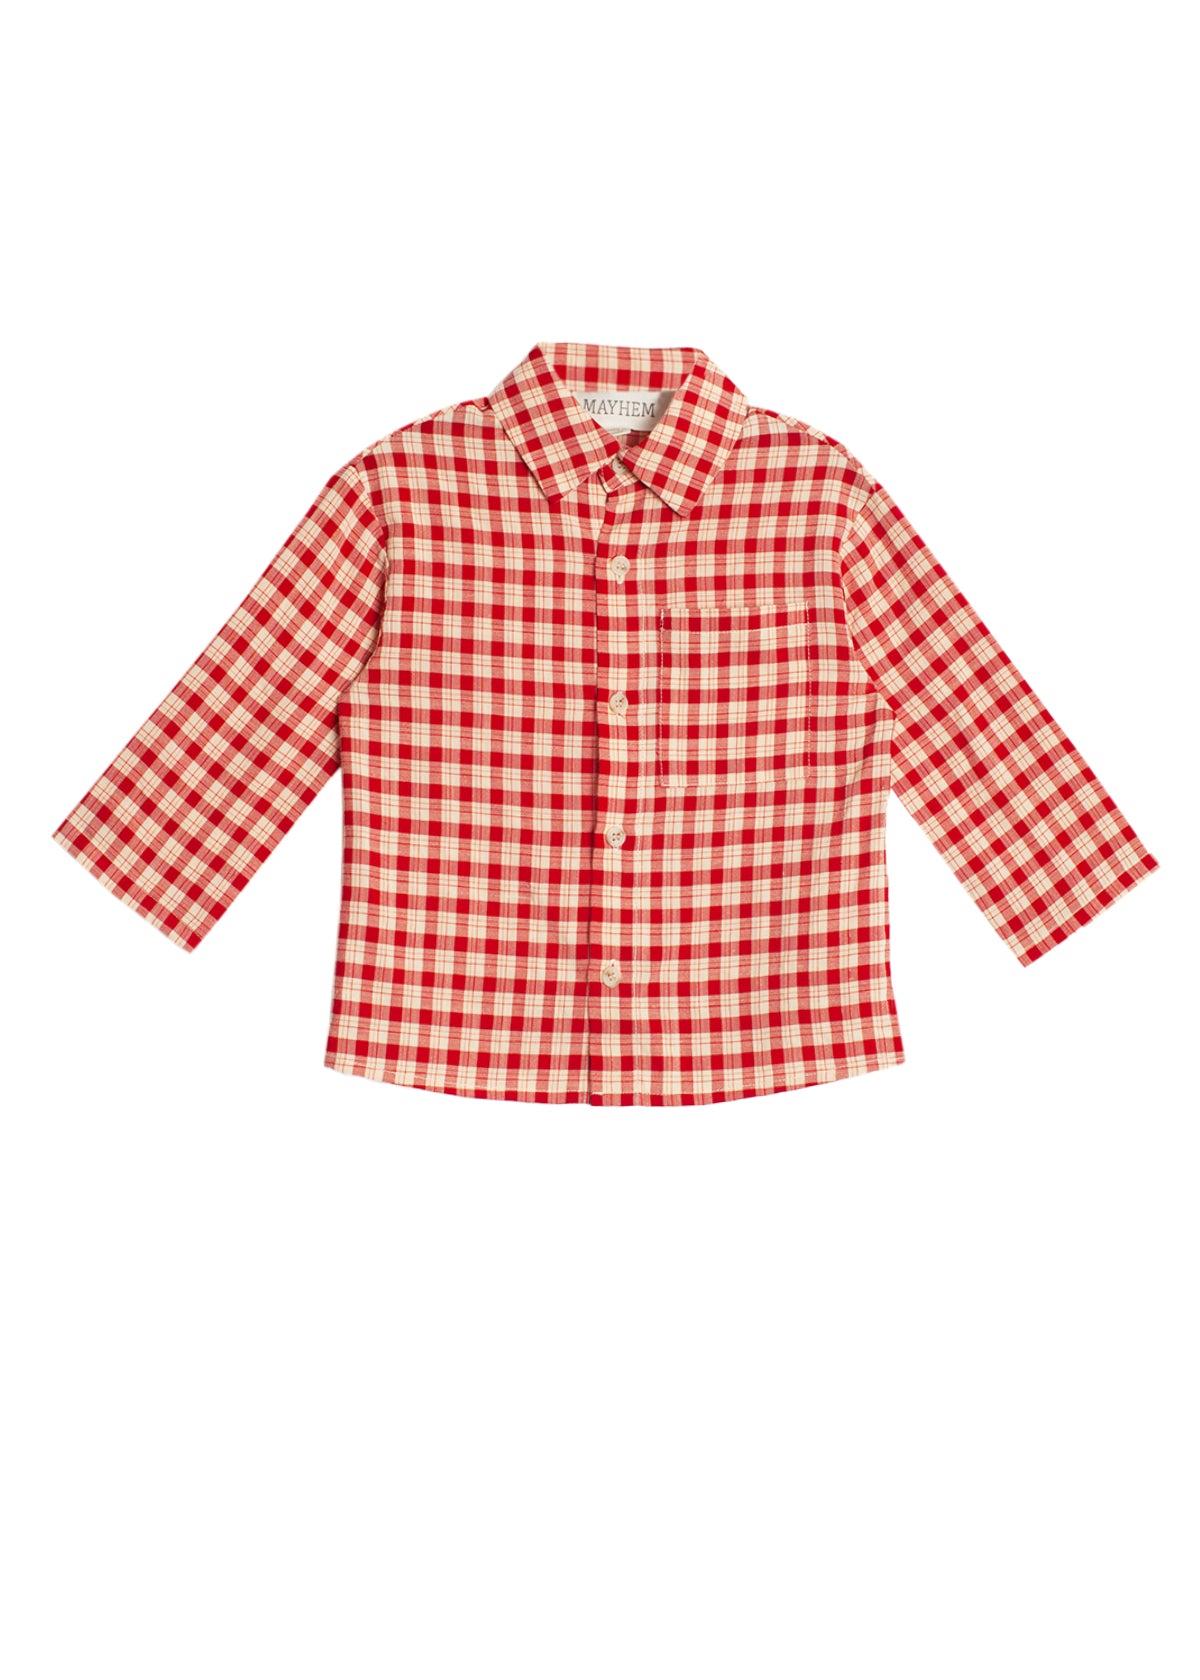 the brother's red plaid shirt